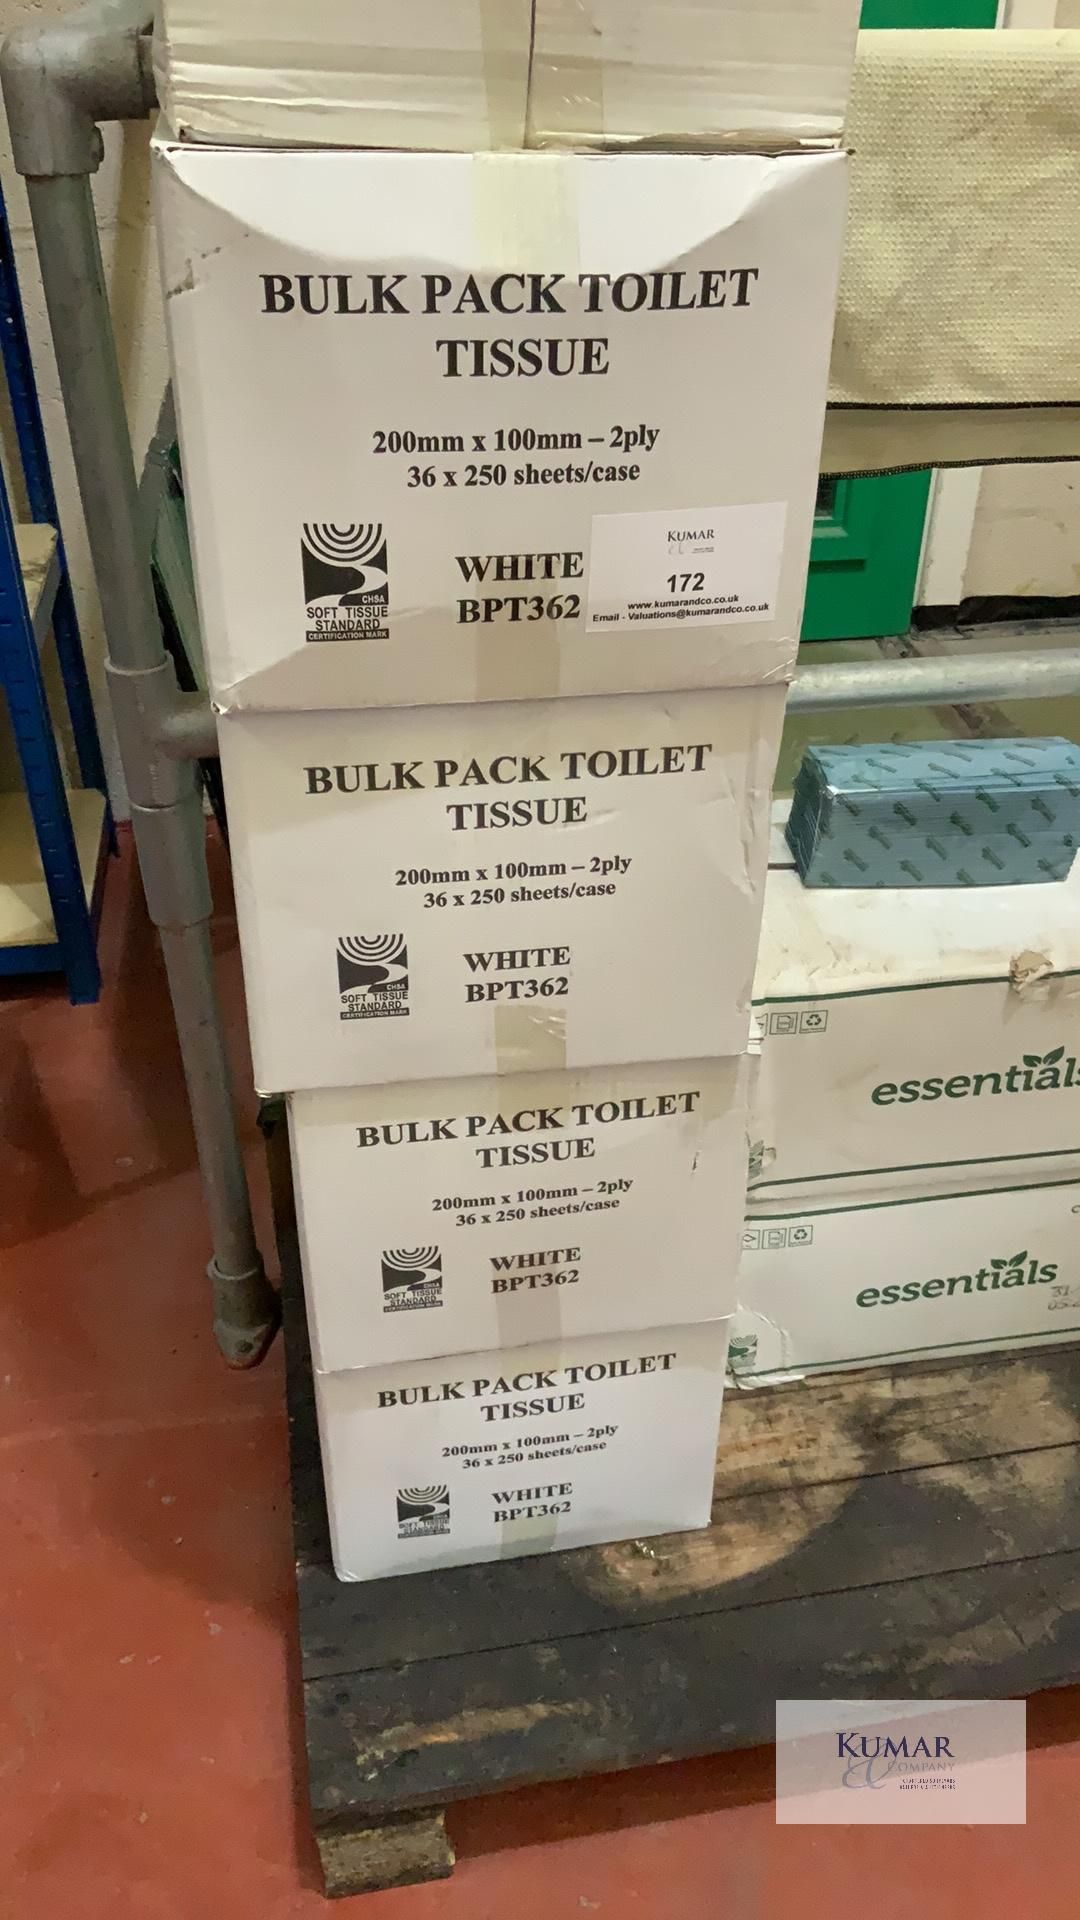 4.5 Outers Bulk Pack Toilet Tissue - 200mm x 100mm - 2 Ply, 36 x 250 Sheets Per Outer, White BPT362, - Image 4 of 13